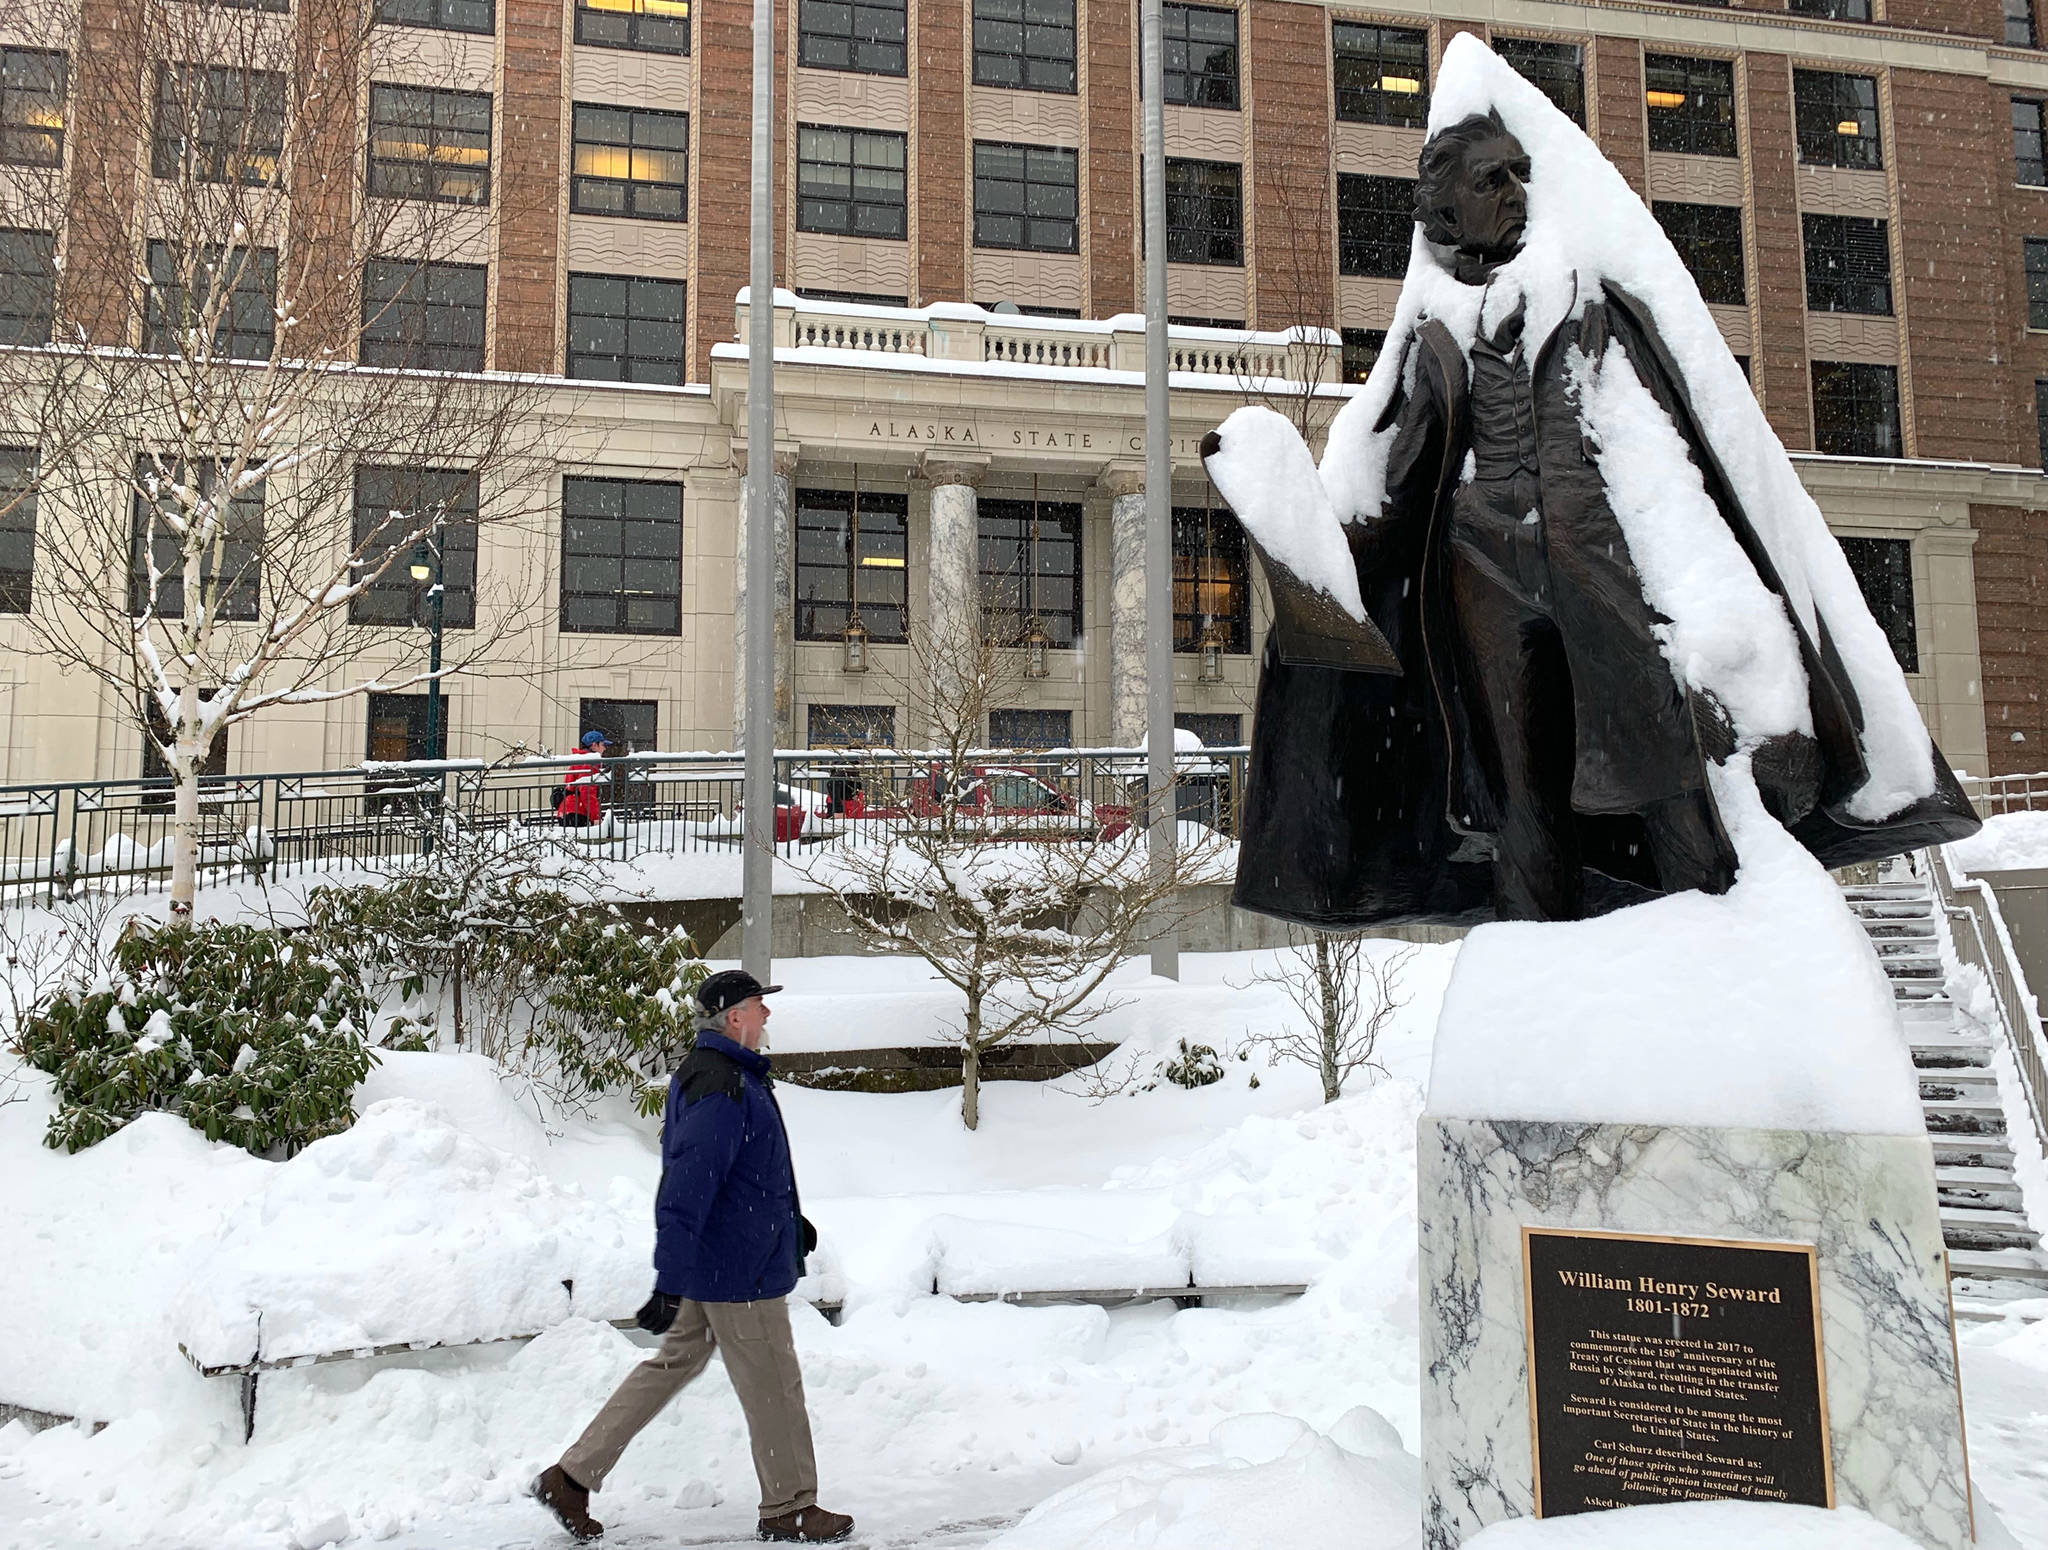 Snow coats the William Henry Seward statue outside of the Alaska State Capitol on Jan. 11, 2019. (Angelo Saggiomo | Juneau Empire)